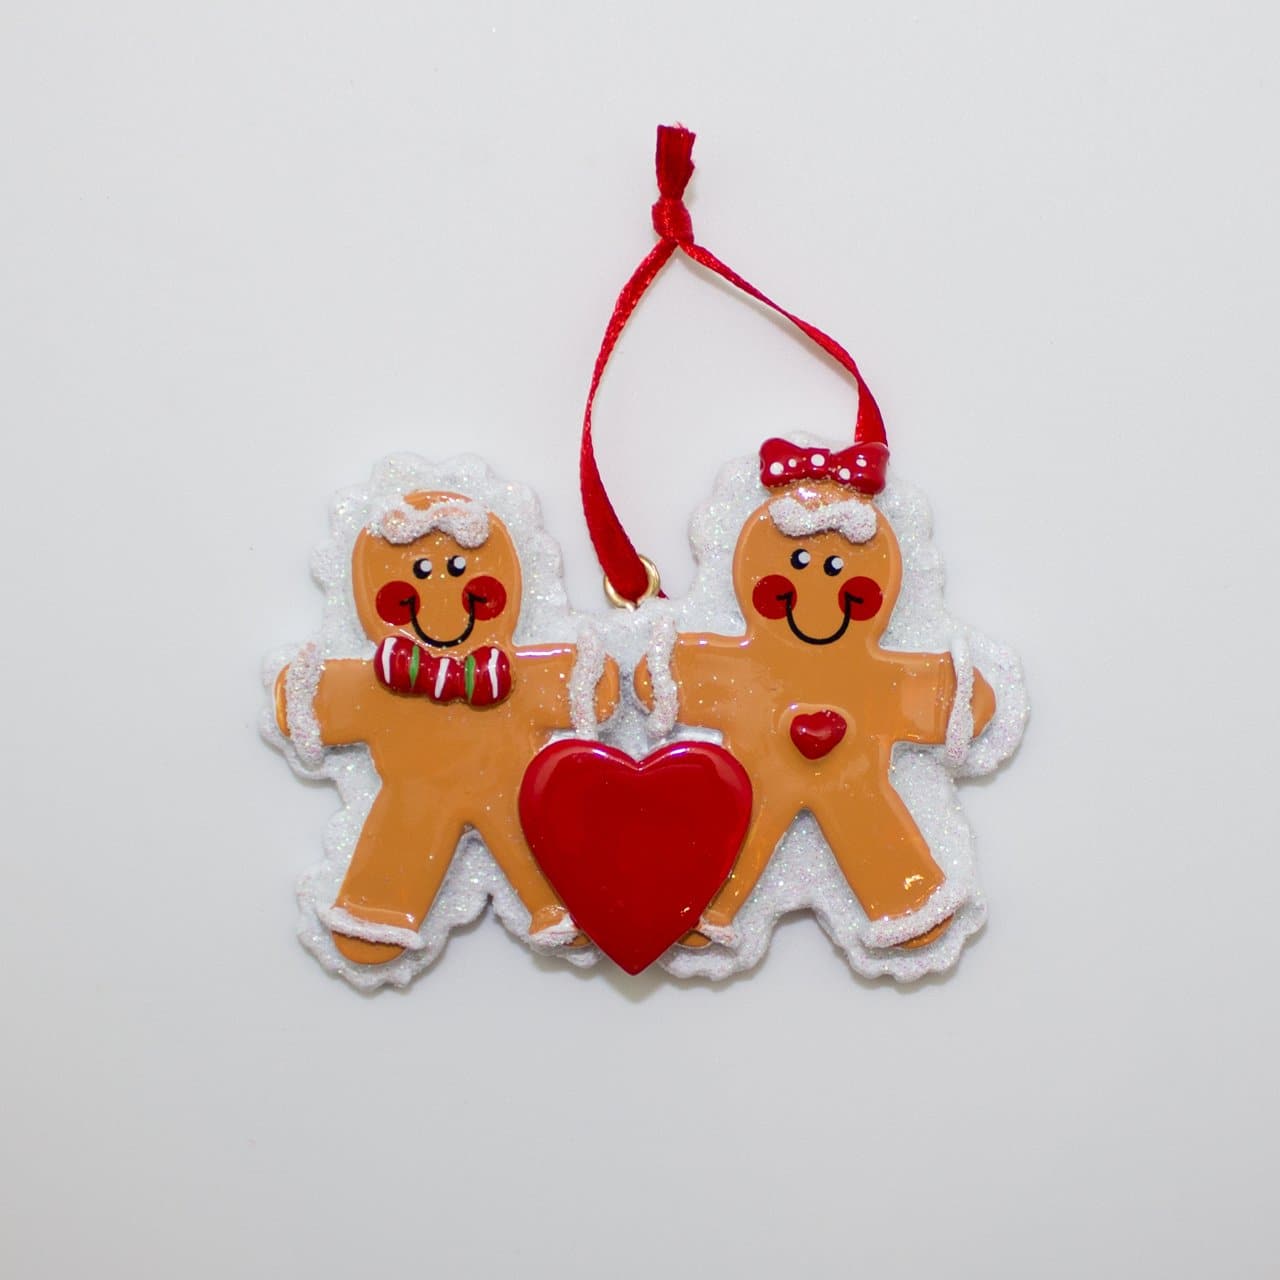 Gingerbread Man Heart - Christmas Ornament (Suitable for Personalization)